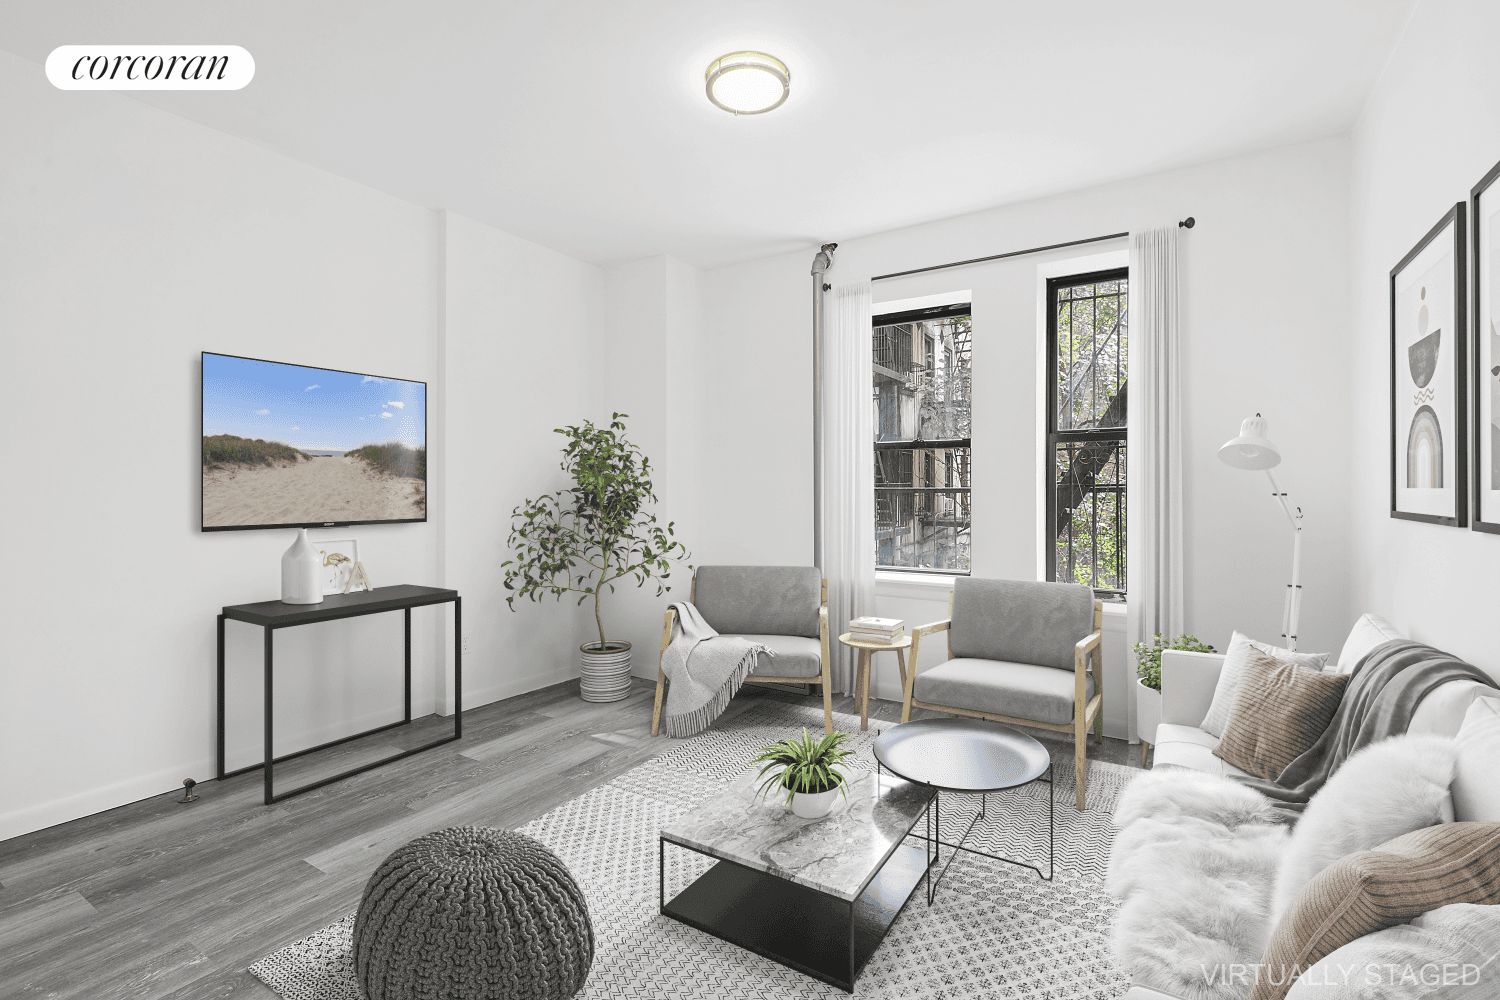 New to market ! East Village one bedroom offering enticingly low maintenance of 410, the open floorplan combined with high ceilings maximizes the living room allowing enough space for a ...